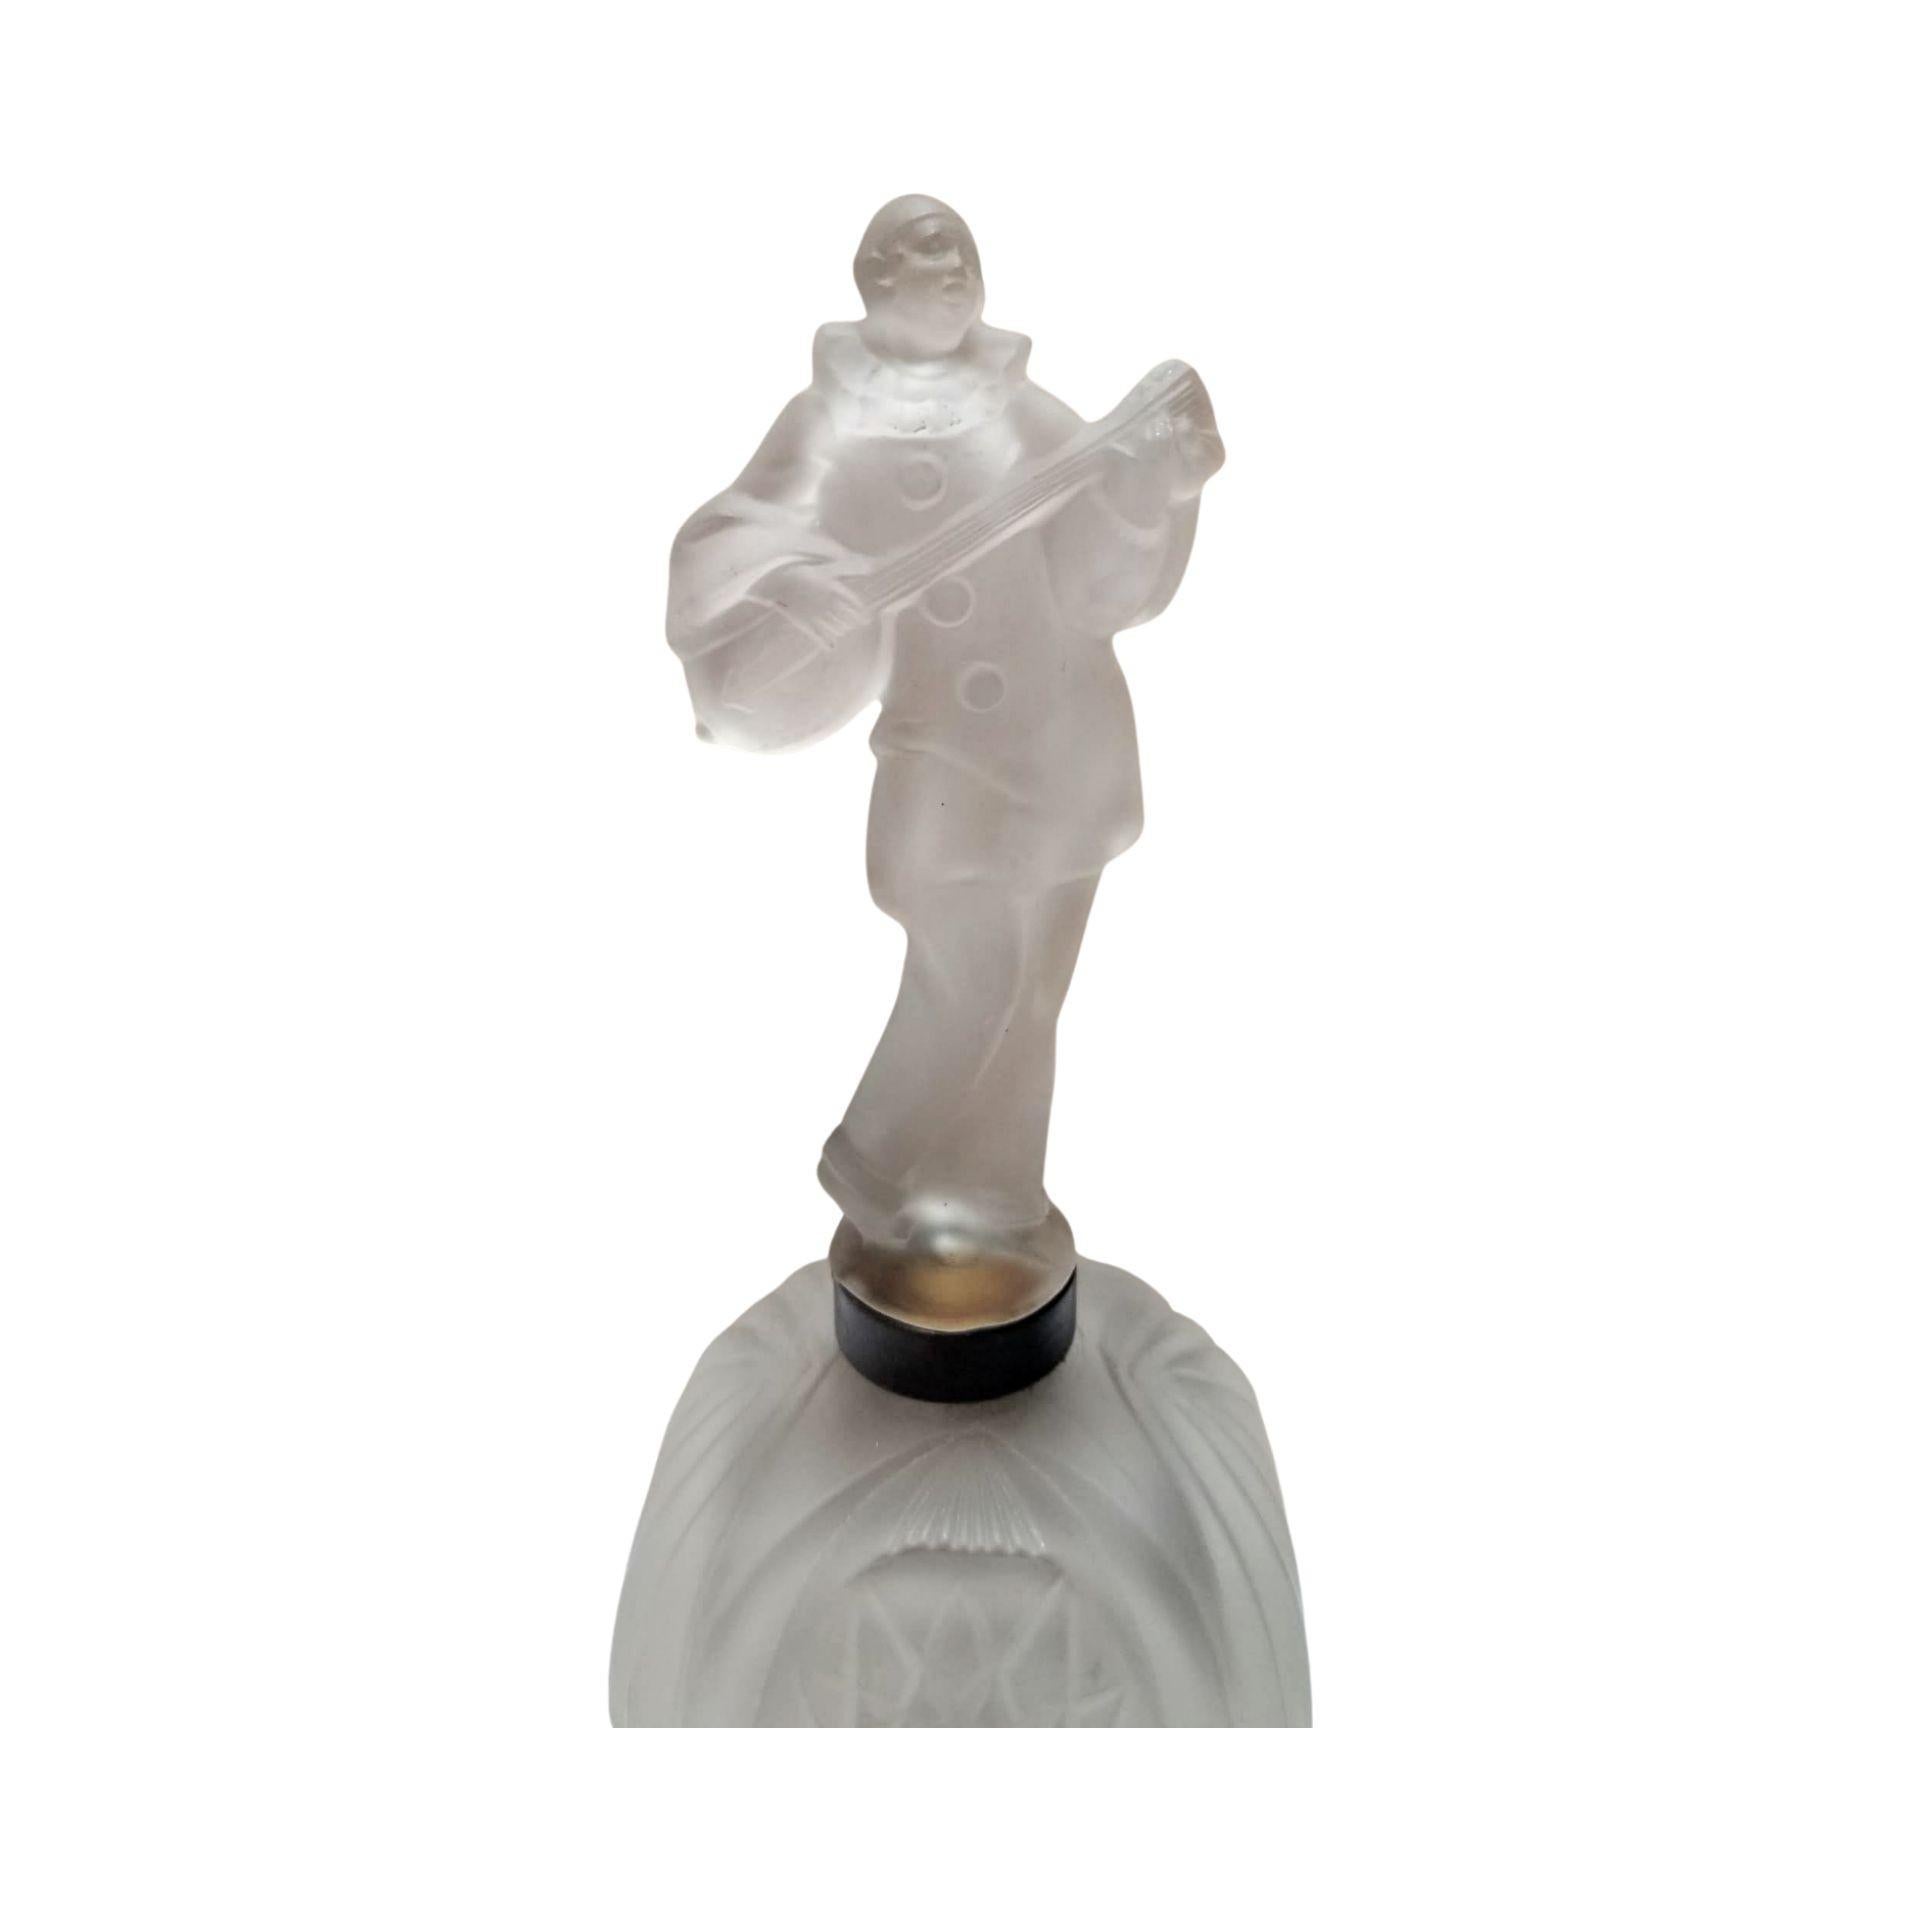 Art Deco lamp statue of a frosted glass jester with illuminating base
This Art Deco frosted glass lamp features a unique design of a jester playing a musical instrument. When illuminated, the lamp emits a soft warm light at its base, and unlit this